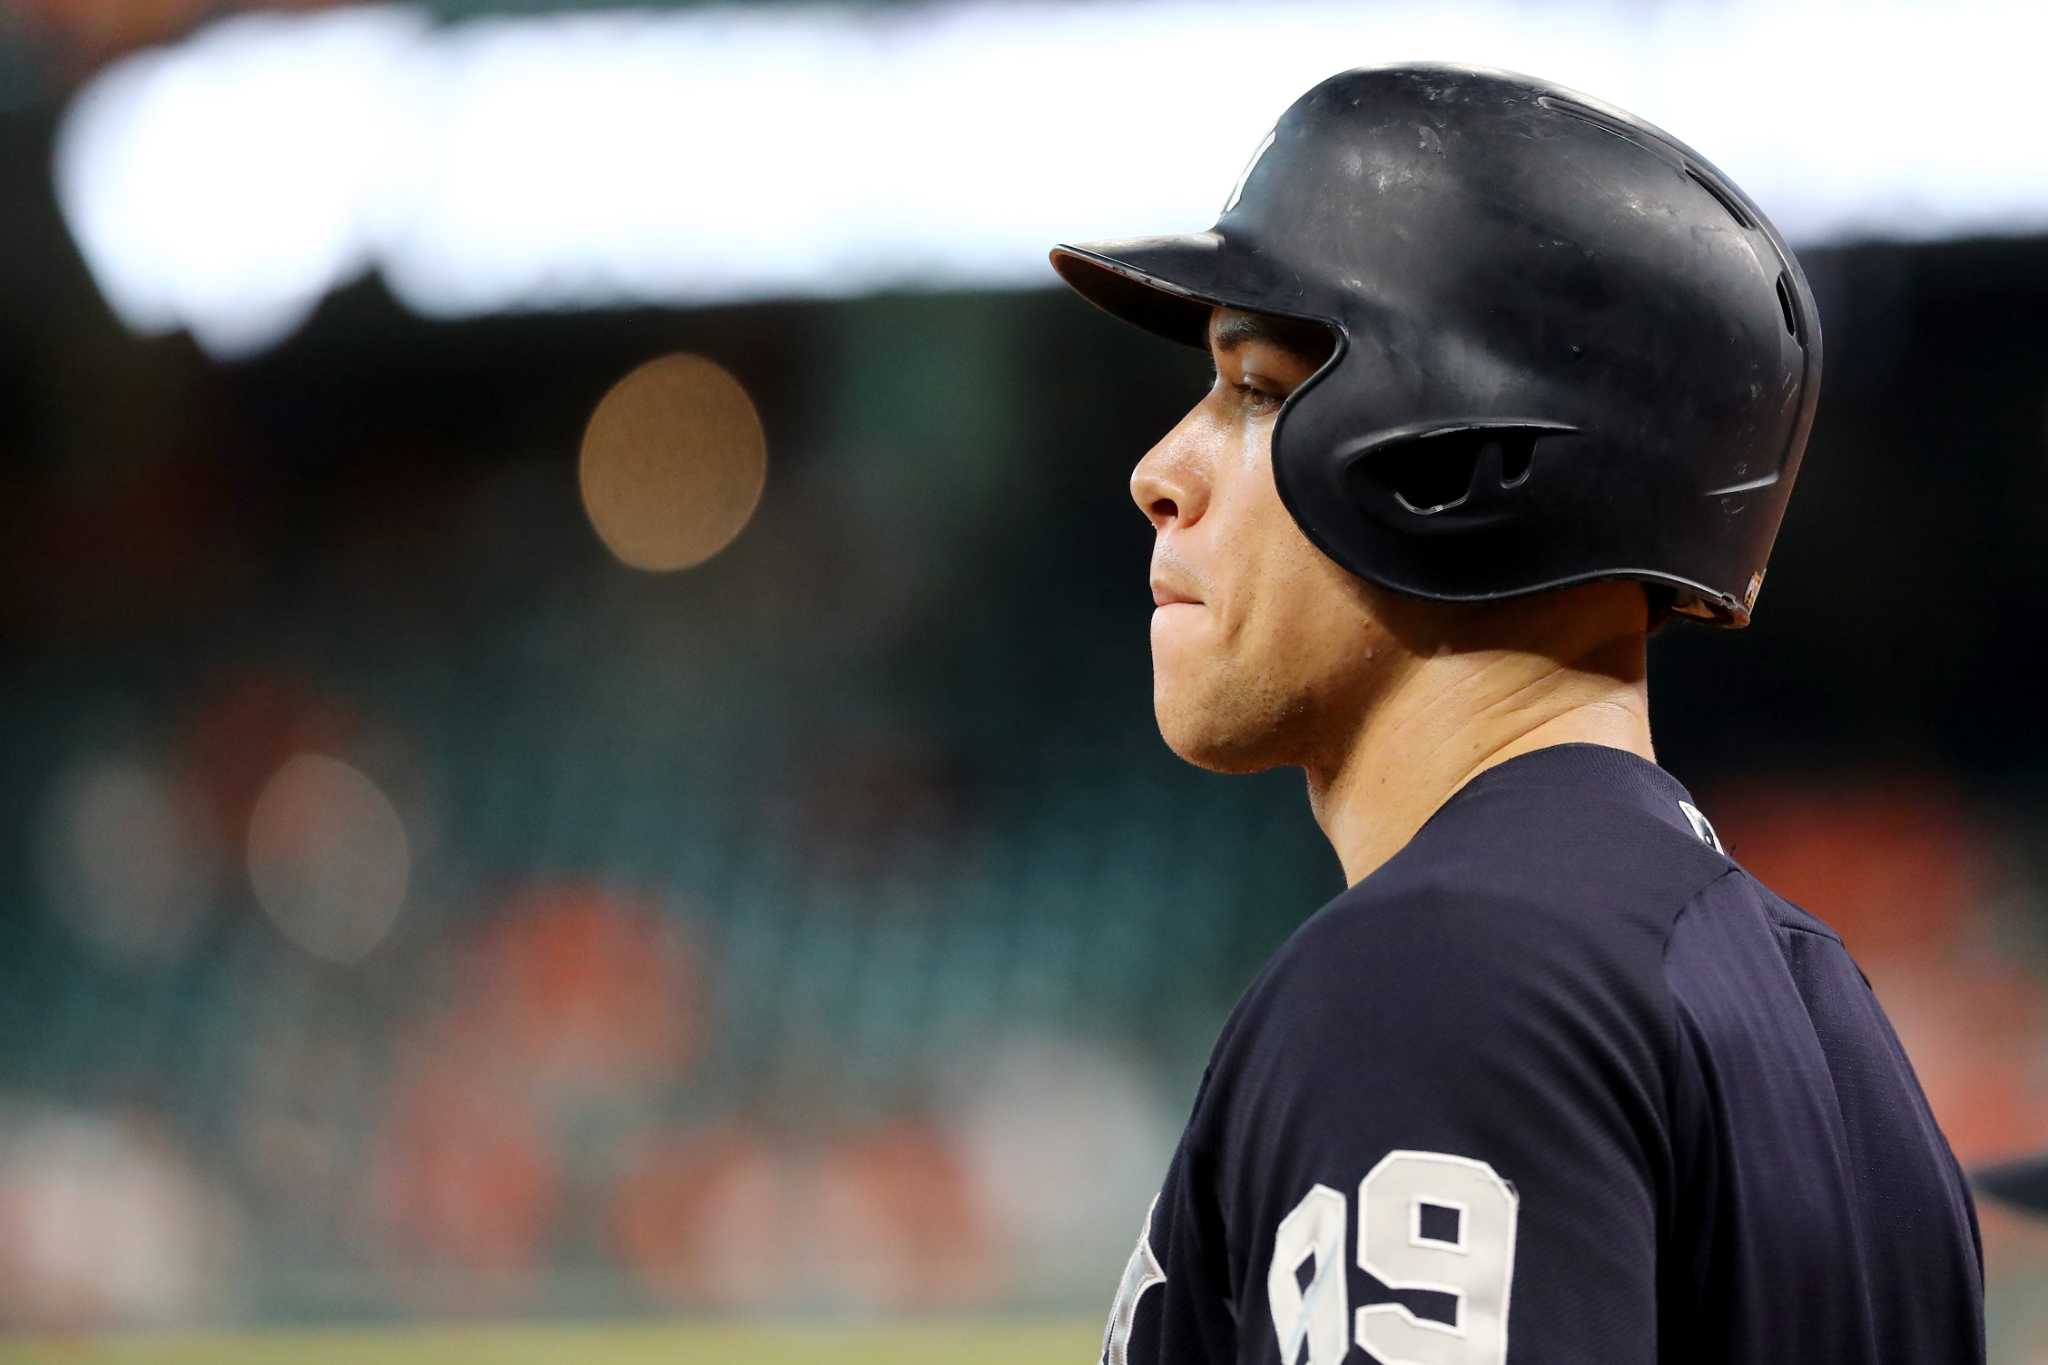 Yankees' Aaron Judge says Astros should be stripped of 2017 title